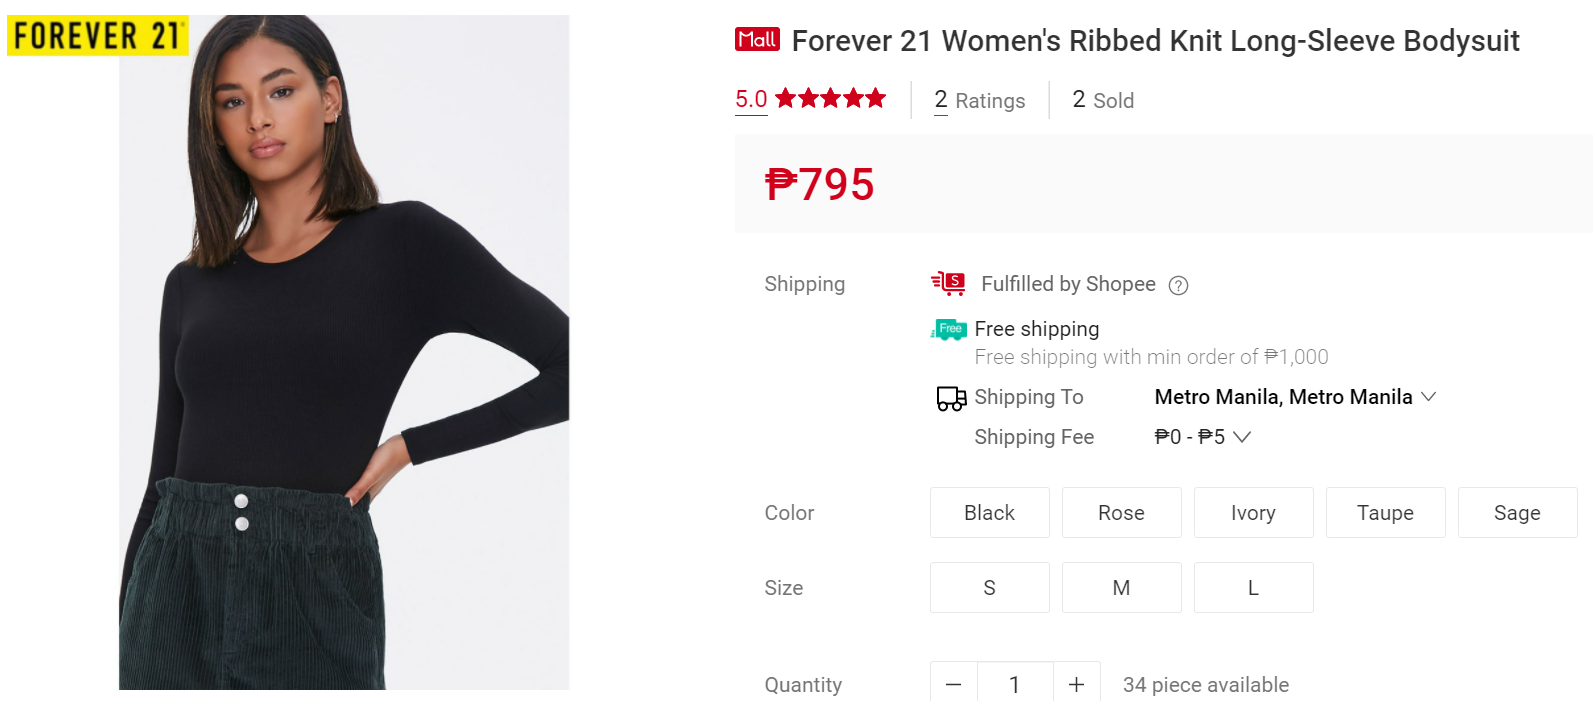 Fashion Basics from Forever 21 on Shopee 8.8 sale - Blog for Tech ...